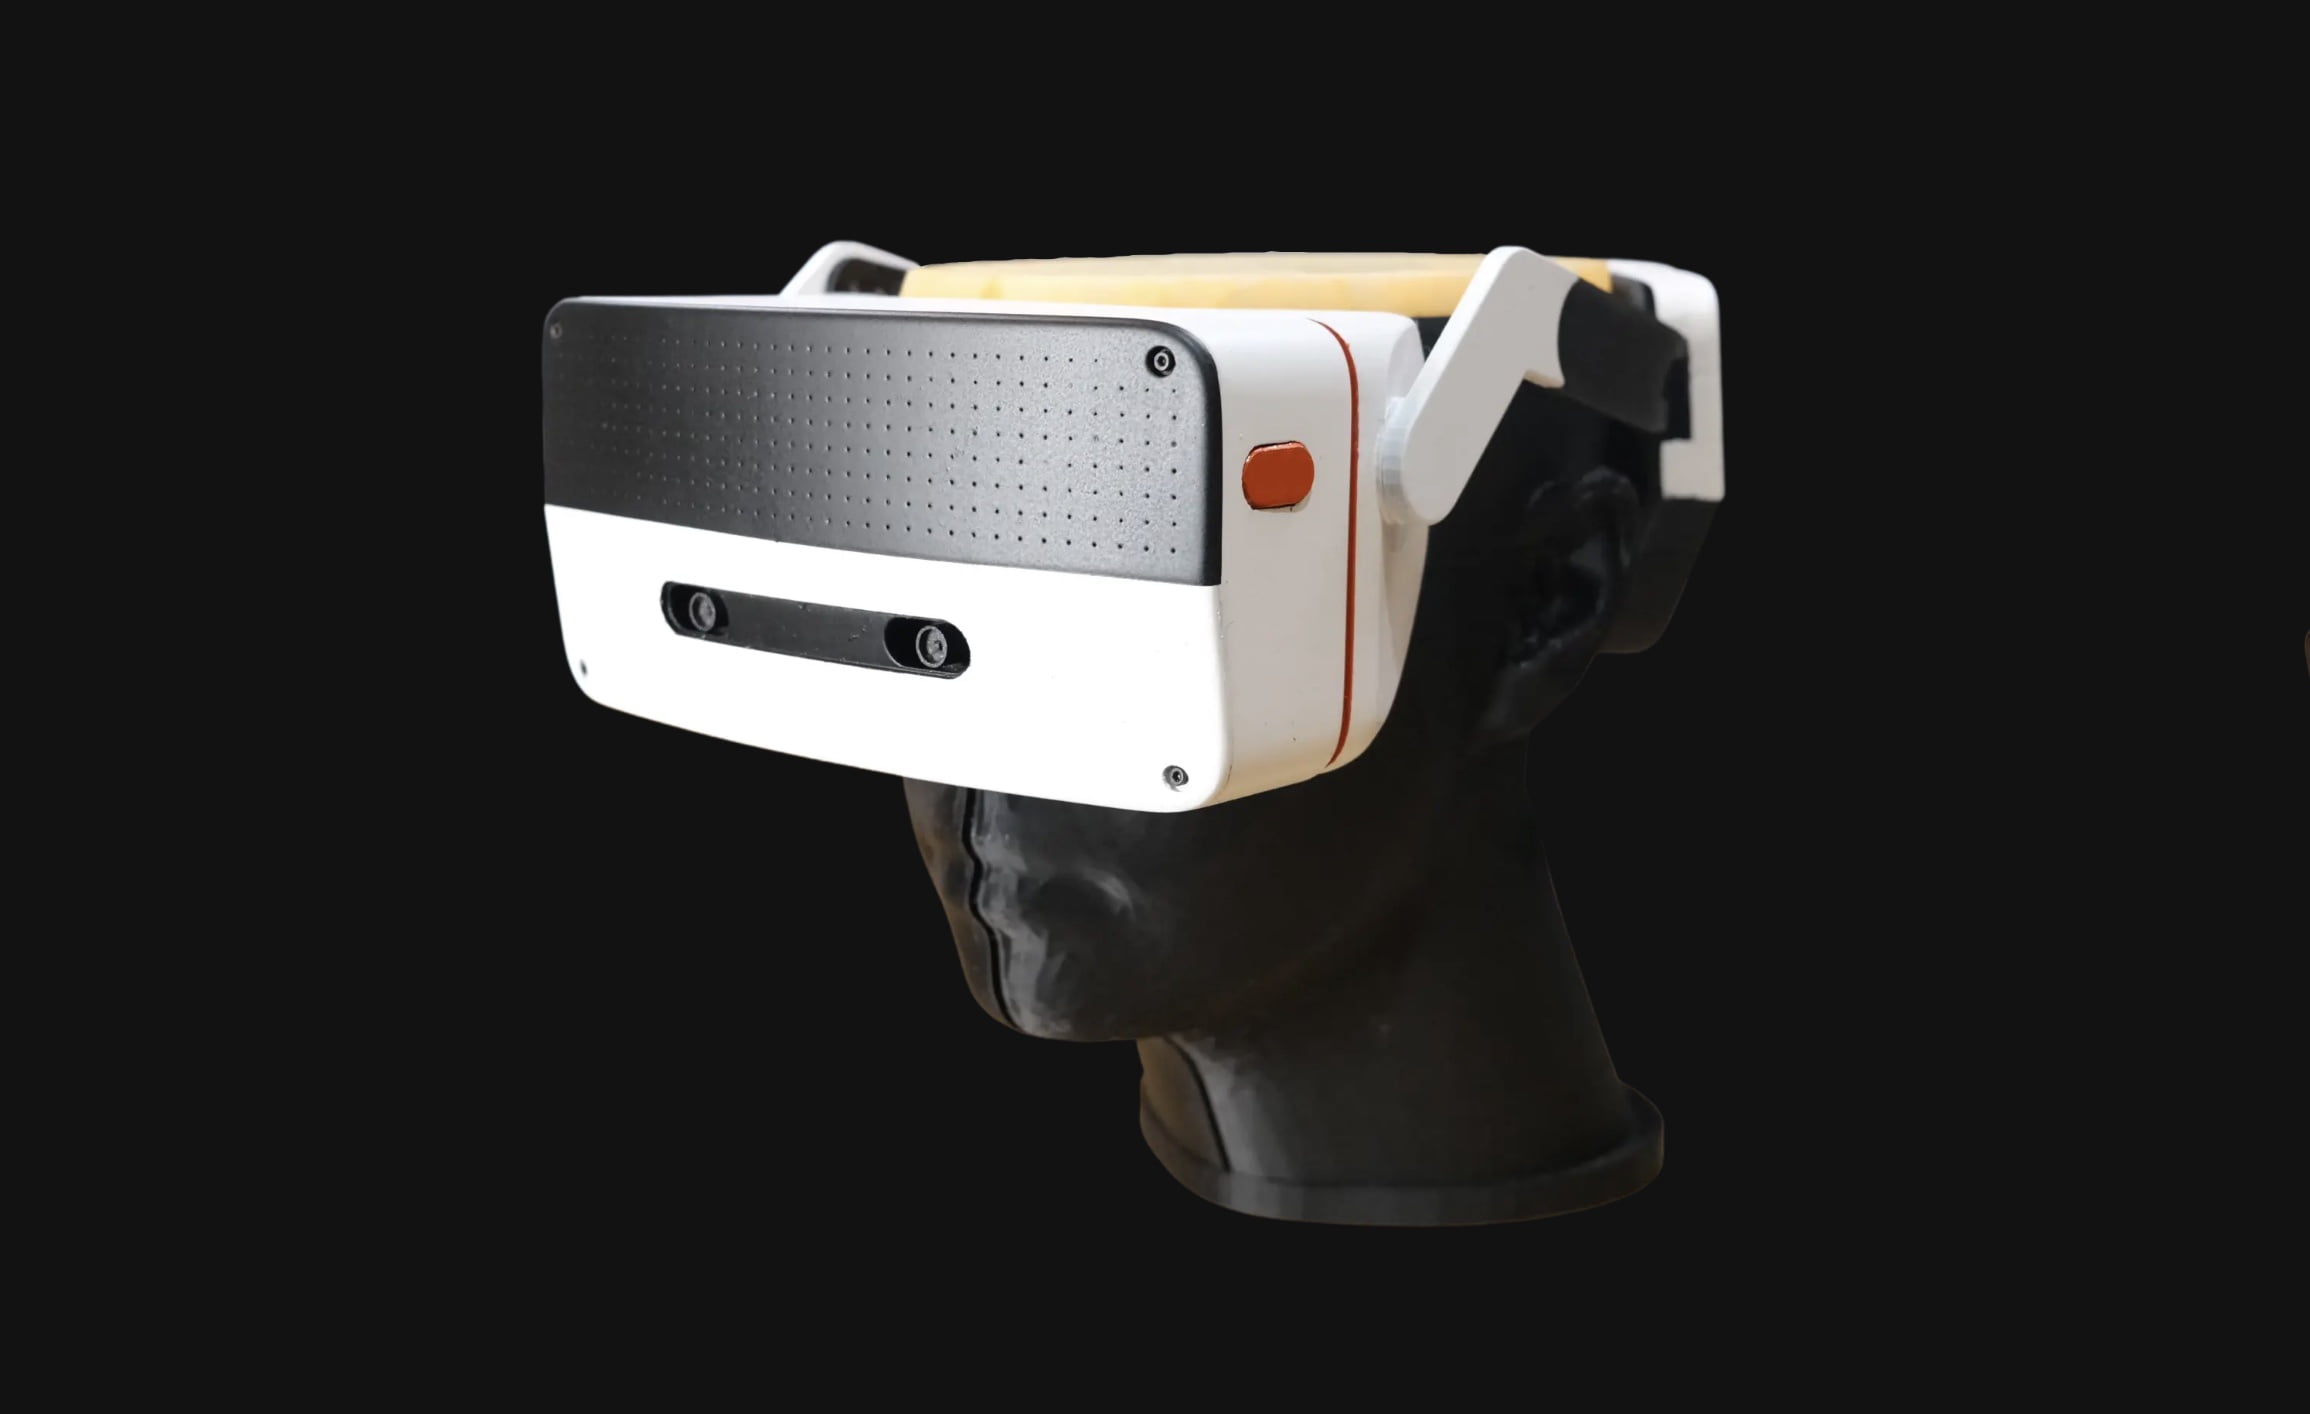 Simula One: VR goggles cost a whopping $2,799 - Here are the reasons